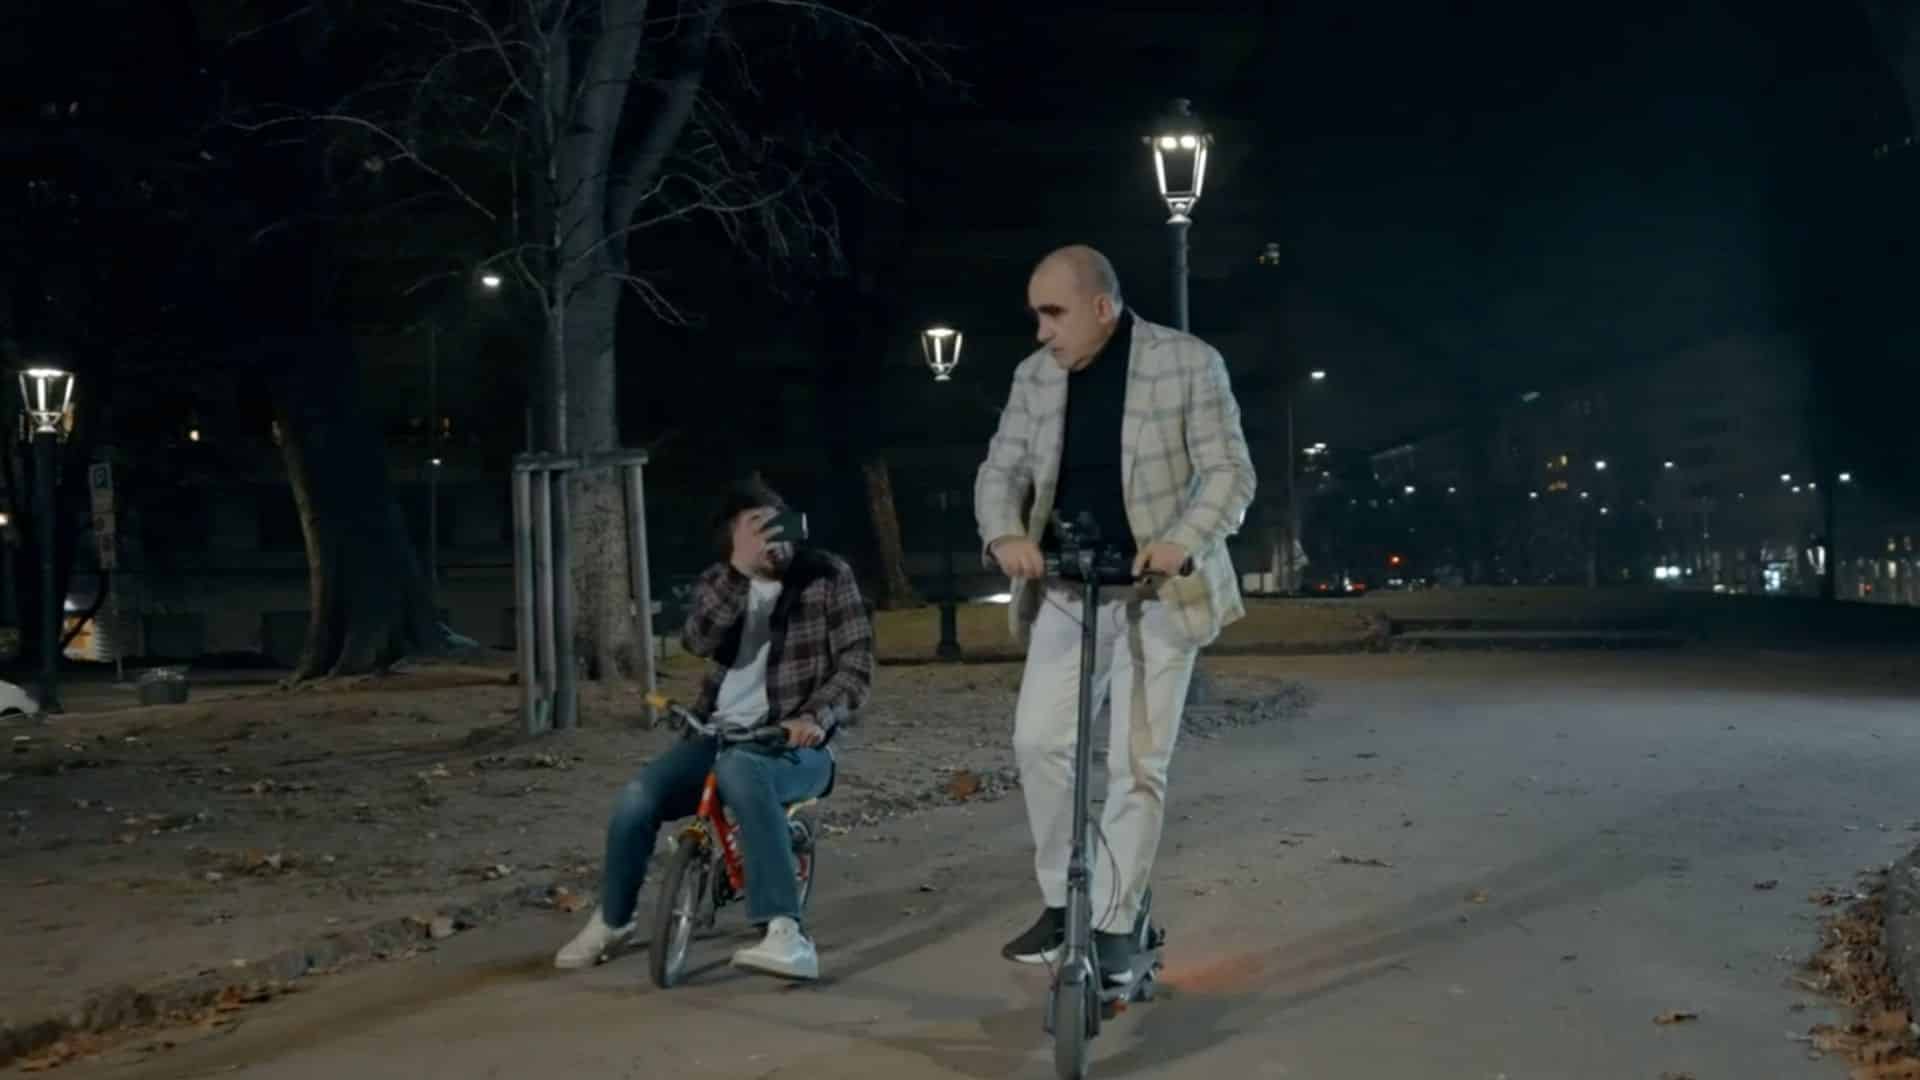 a freeze frame from Plesh's immersive hybrid event - 2 Italian actors in a park at night time - one on a scooter, the other on a bike taking a picture with his phone